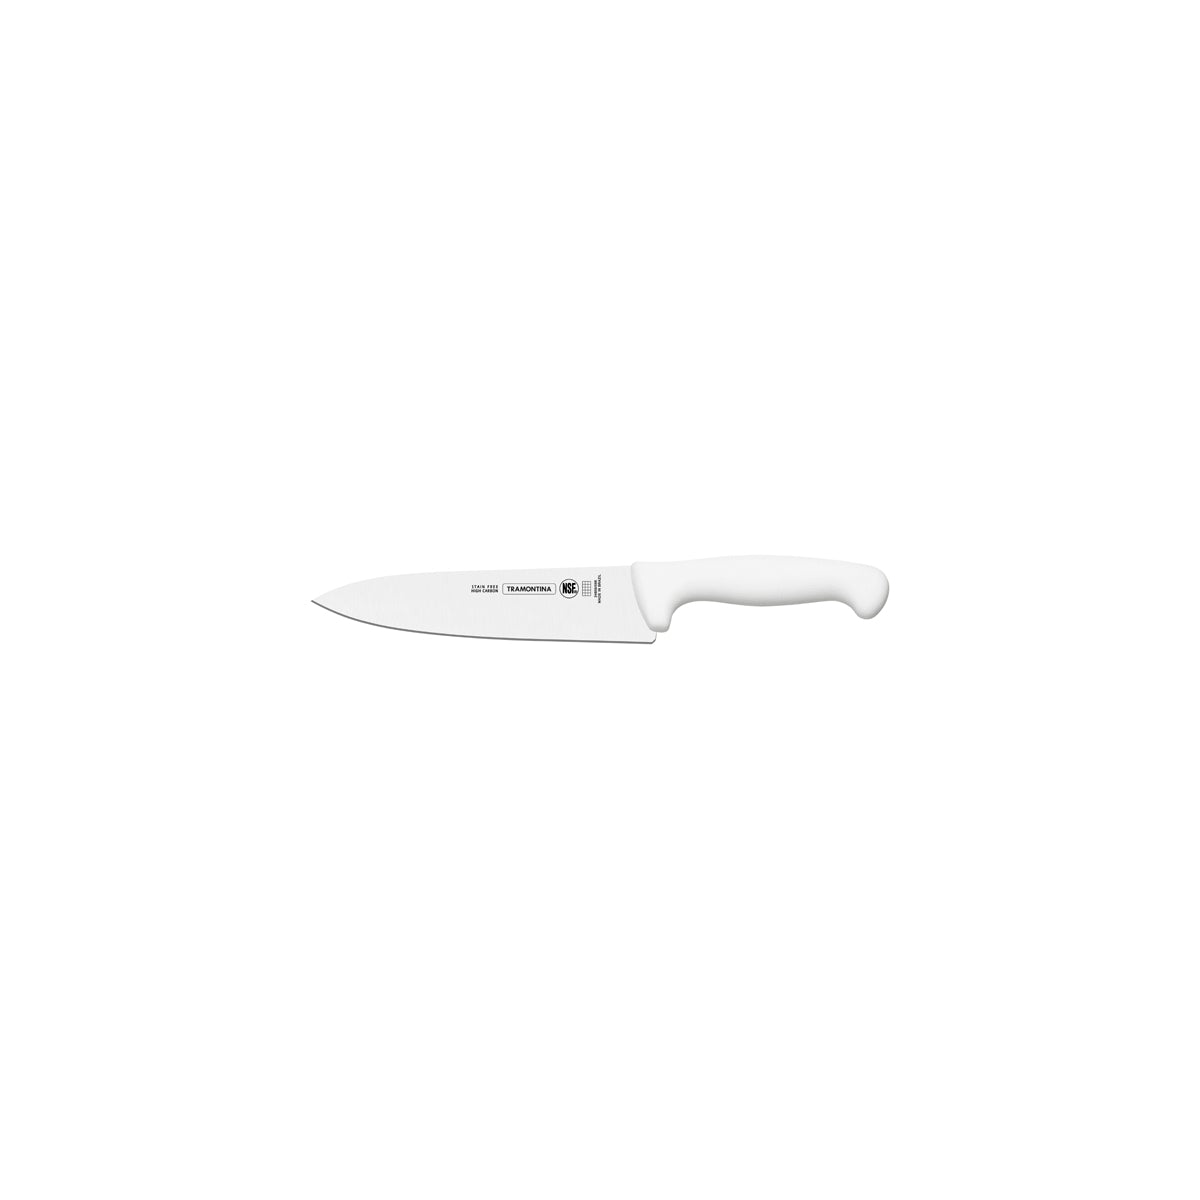 TM24609/088 Tramontina Professional Master Meat / Carving Knife Curved Blade White 203mm Tomkin Australia Hospitality Supplies